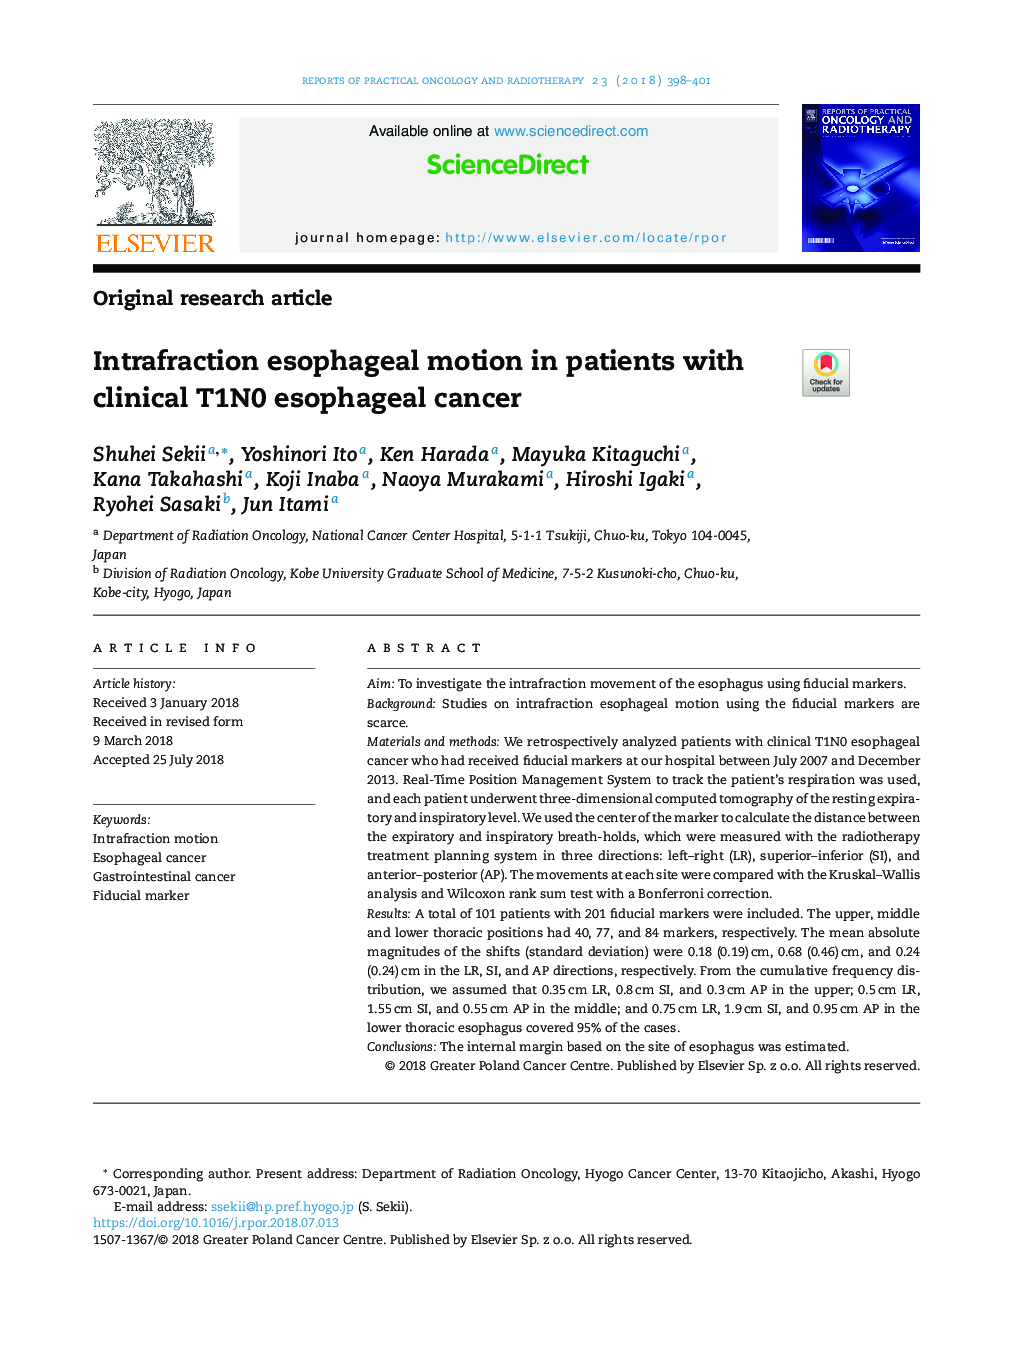 Intrafraction esophageal motion in patients with clinical T1N0 esophageal cancer